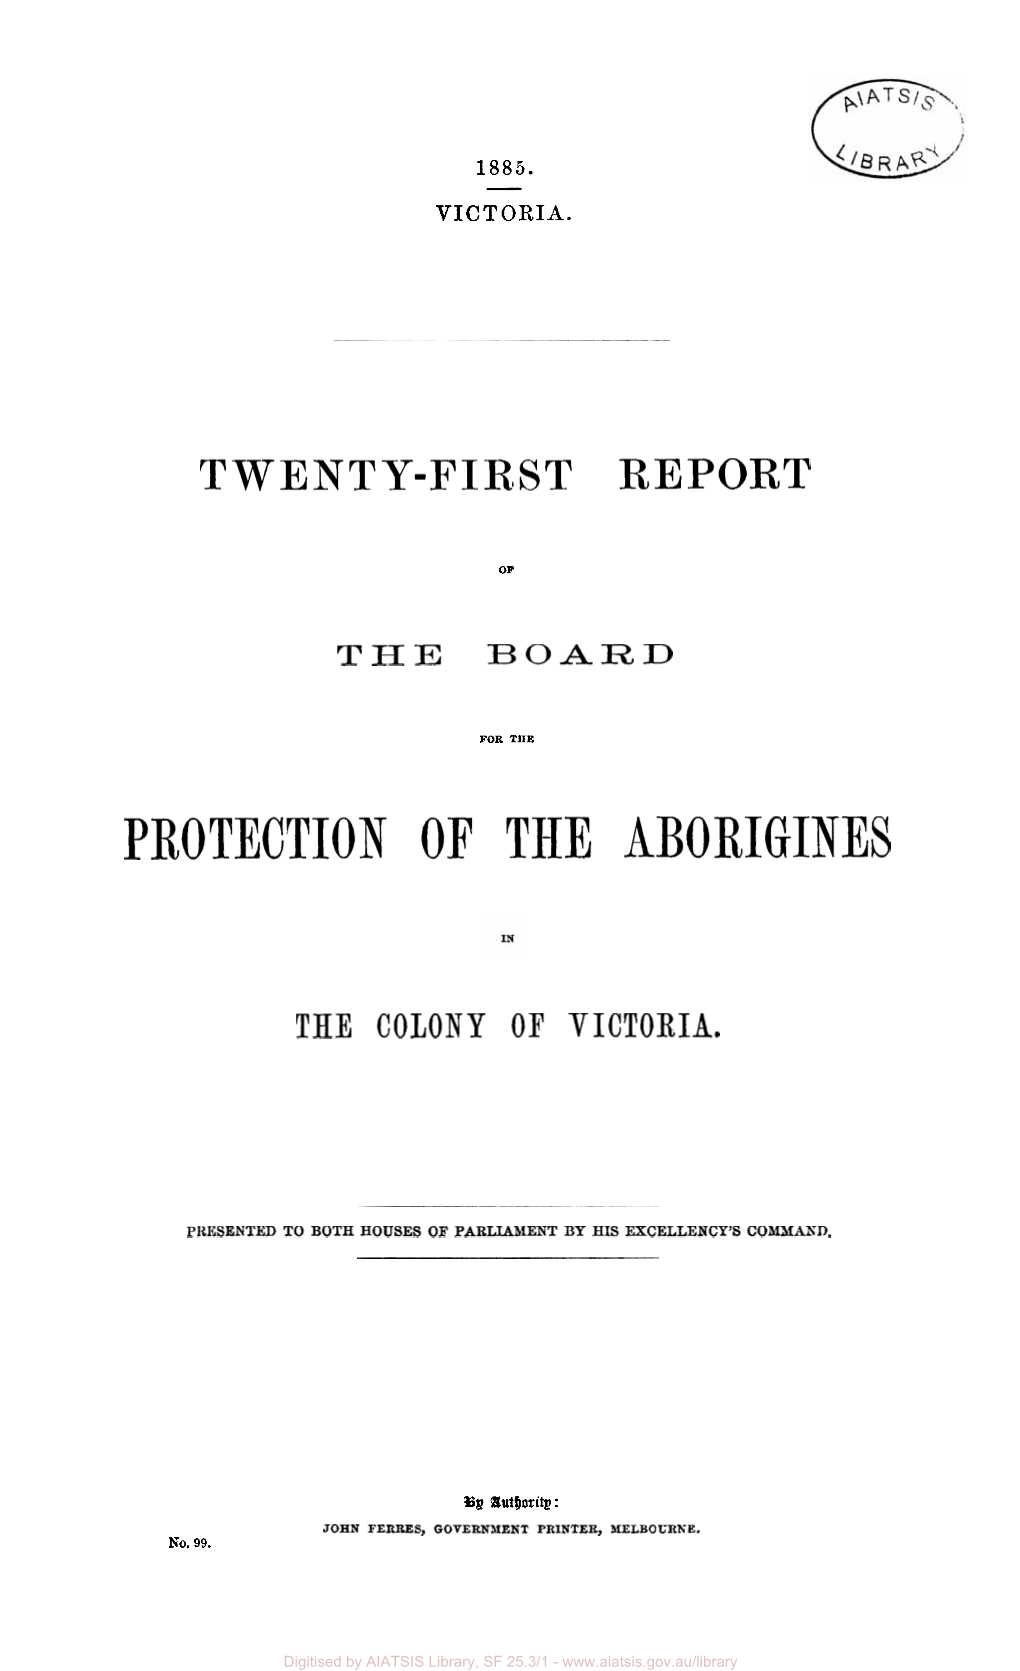 Twenty First Report of the Board for the Protection of the Aborigines In